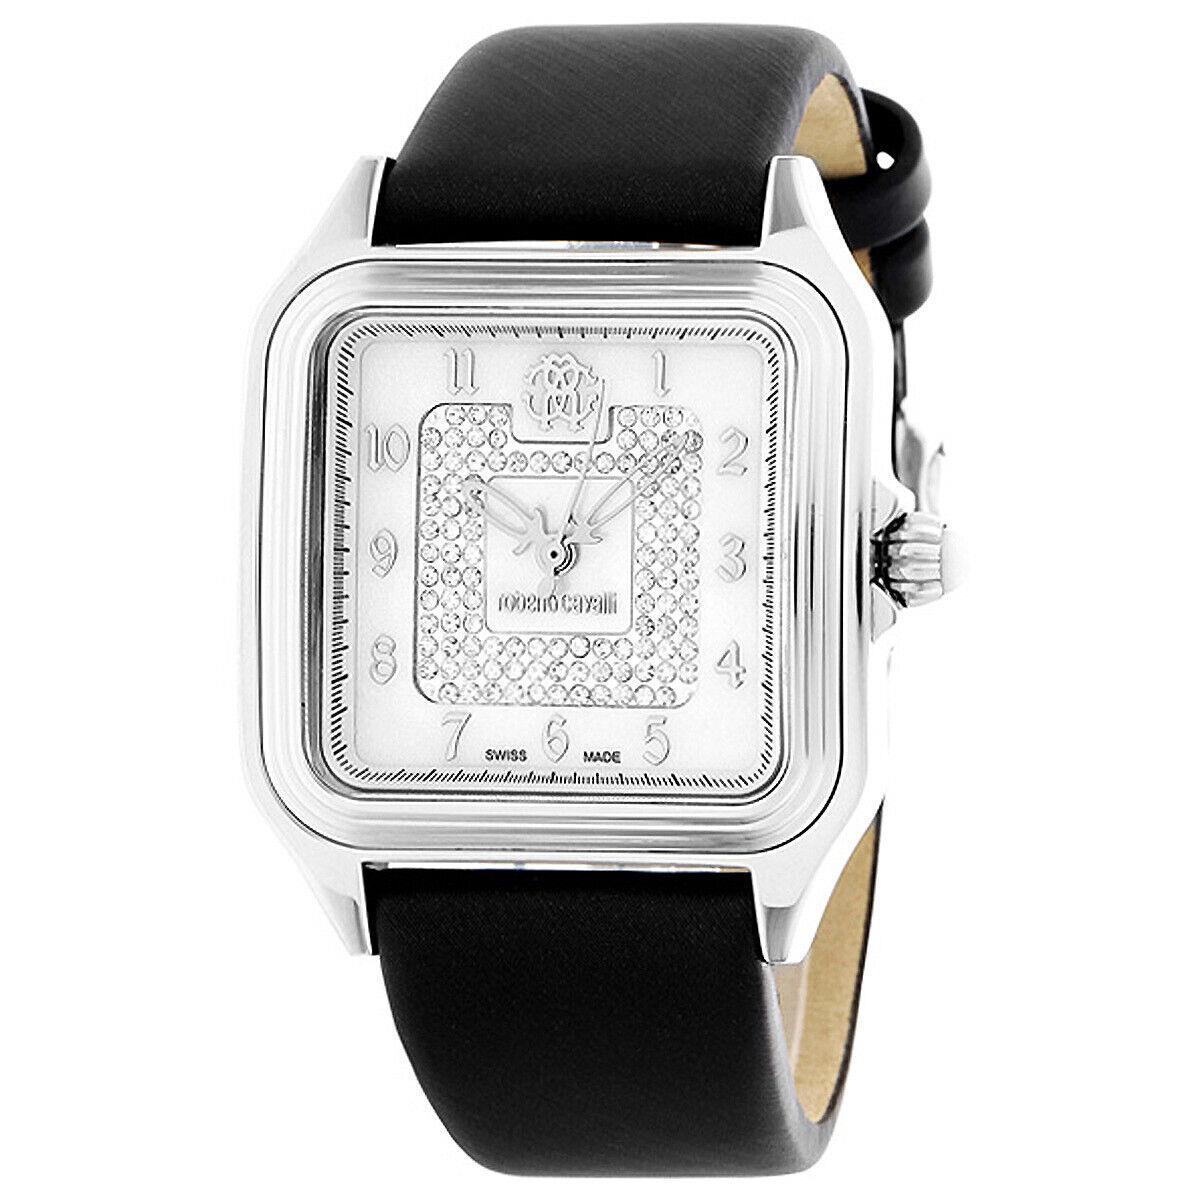 Roberto Cavalli R7251192515 Mother-of-pearl Crystal Accented Dial Ladies Watch